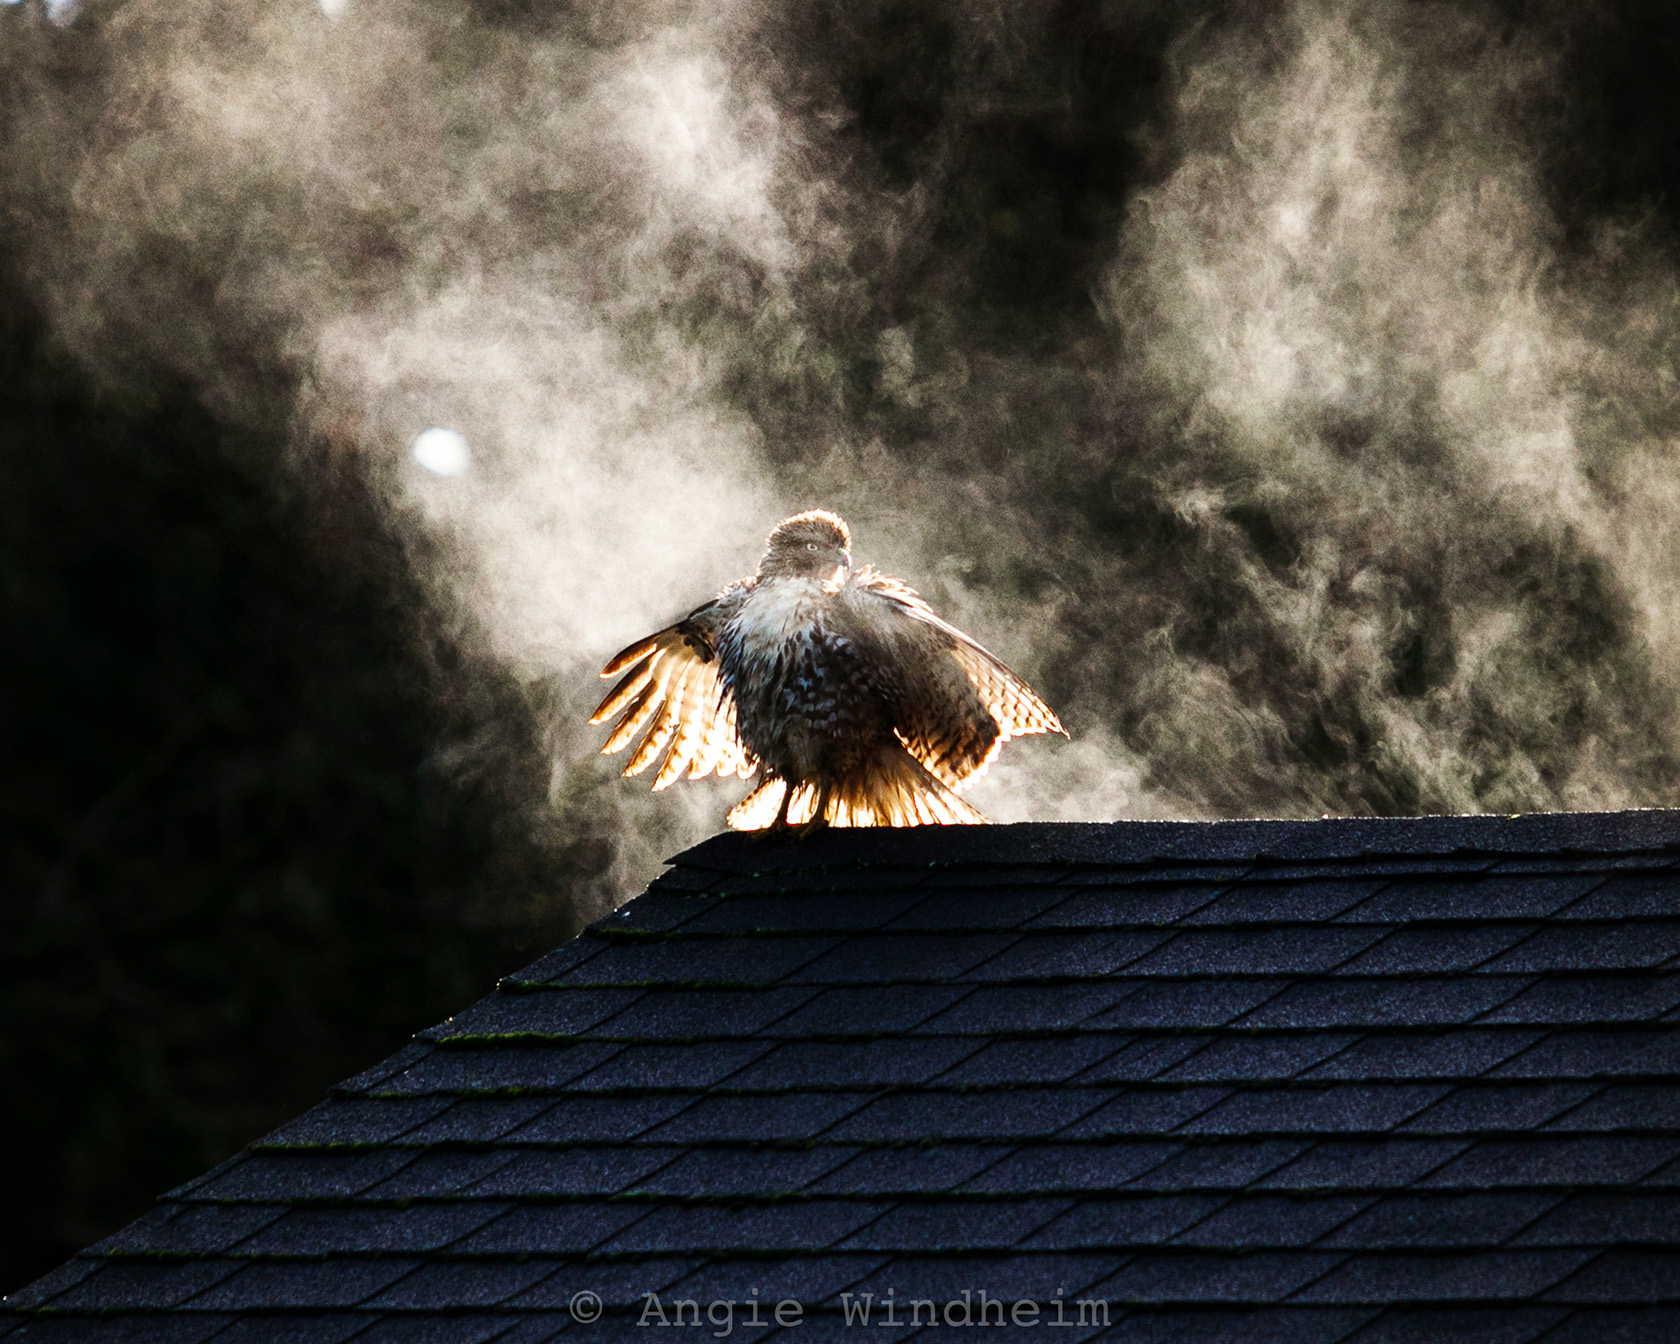 Red-tailed hawk enjoys the steam and morning sunlight on a rooftop in Oregon.